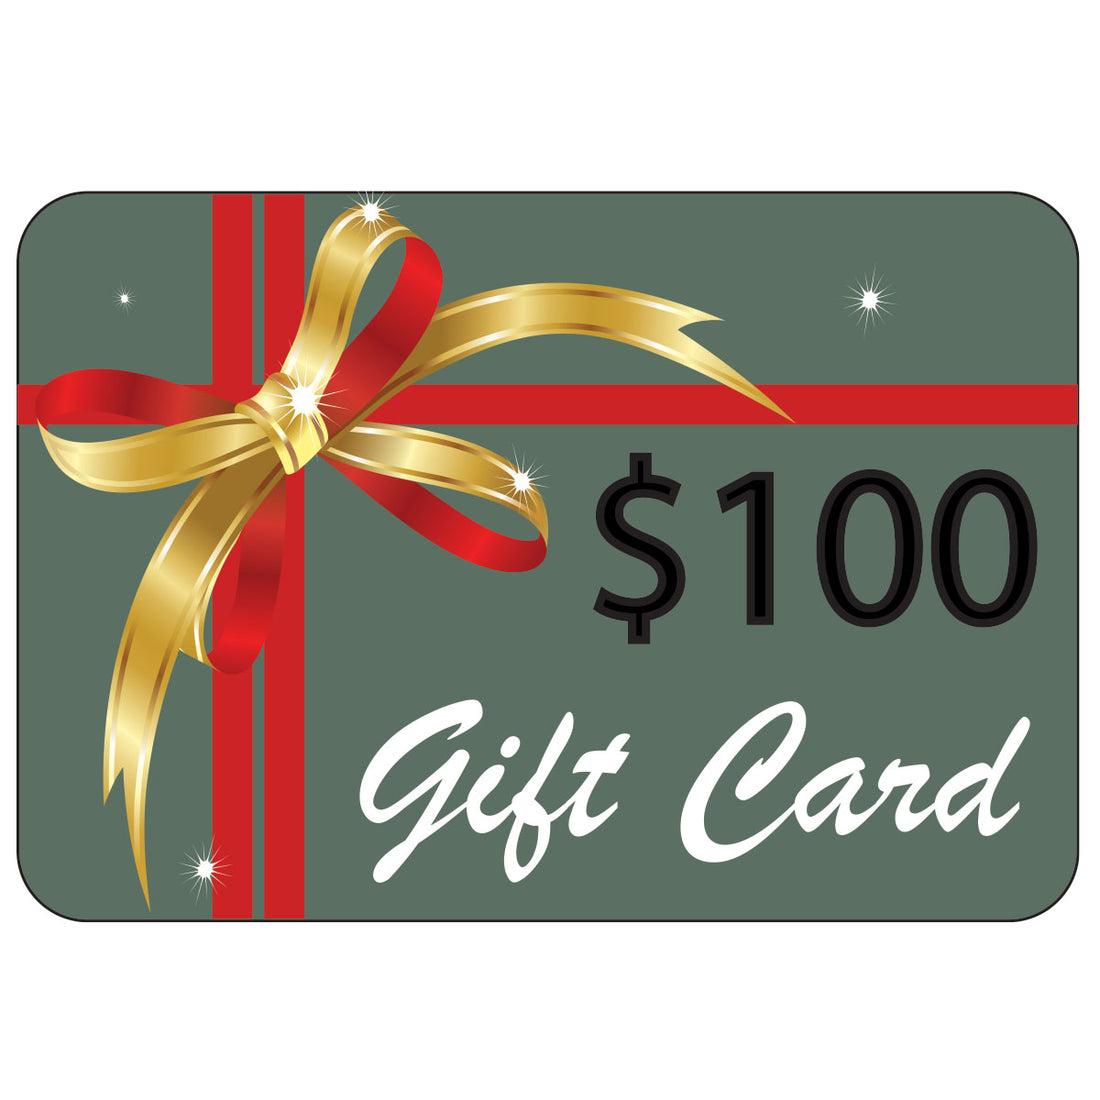 $100 GIFT Card, Brand New, Unused, No Shipping Charge - Super Quick  $250.00 - PicClick